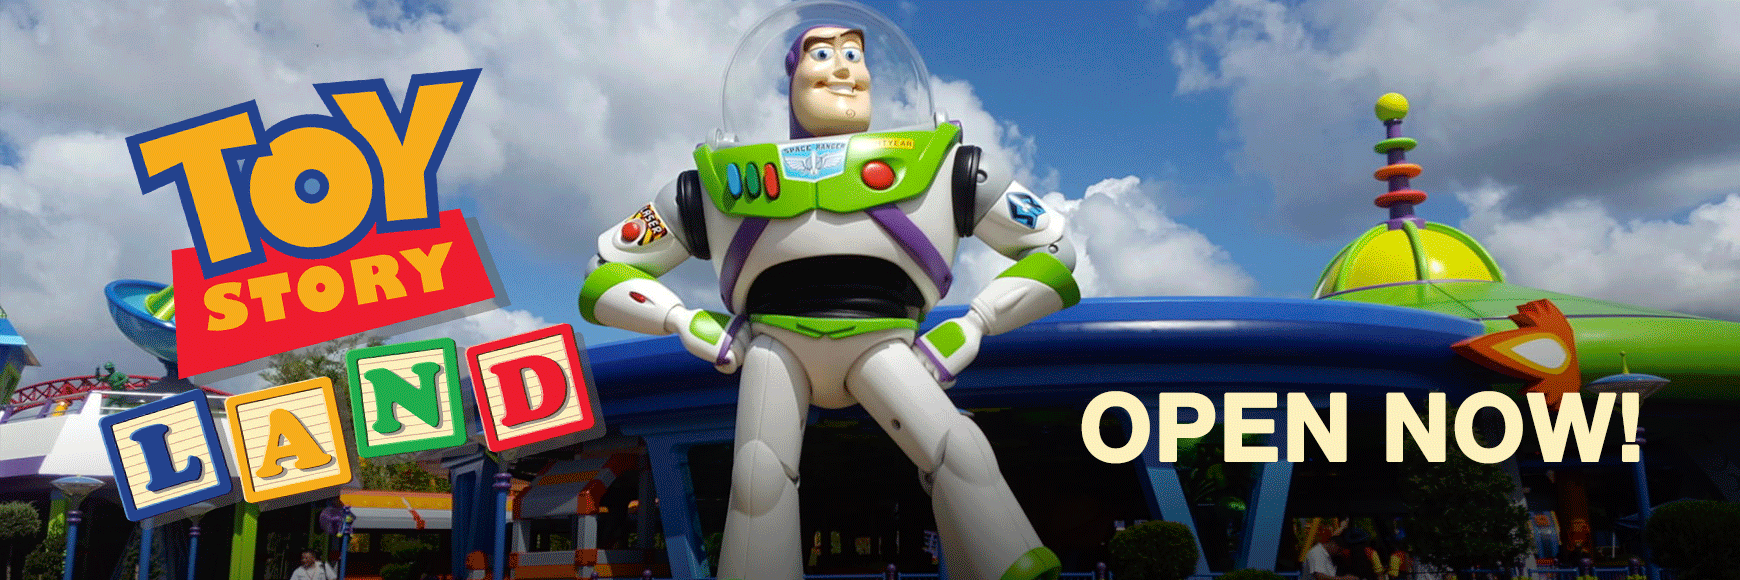 Toy Story Land is Open Now - Orlando Vacation